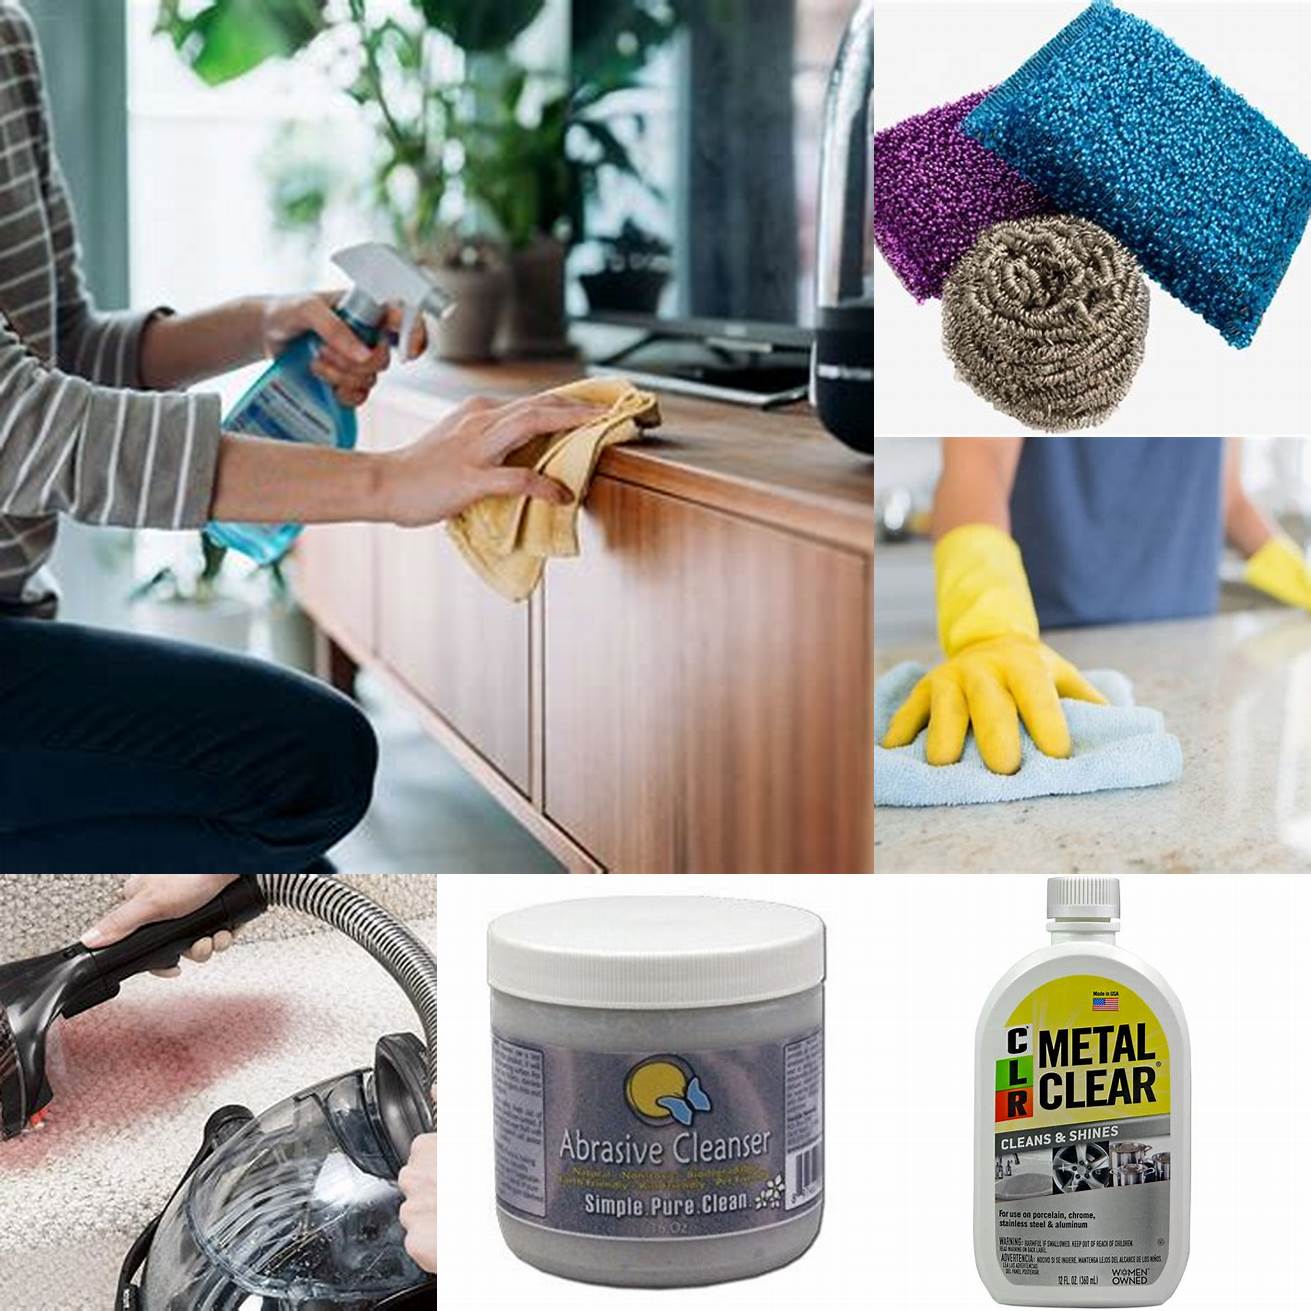 Using a mild abrasive cleaner